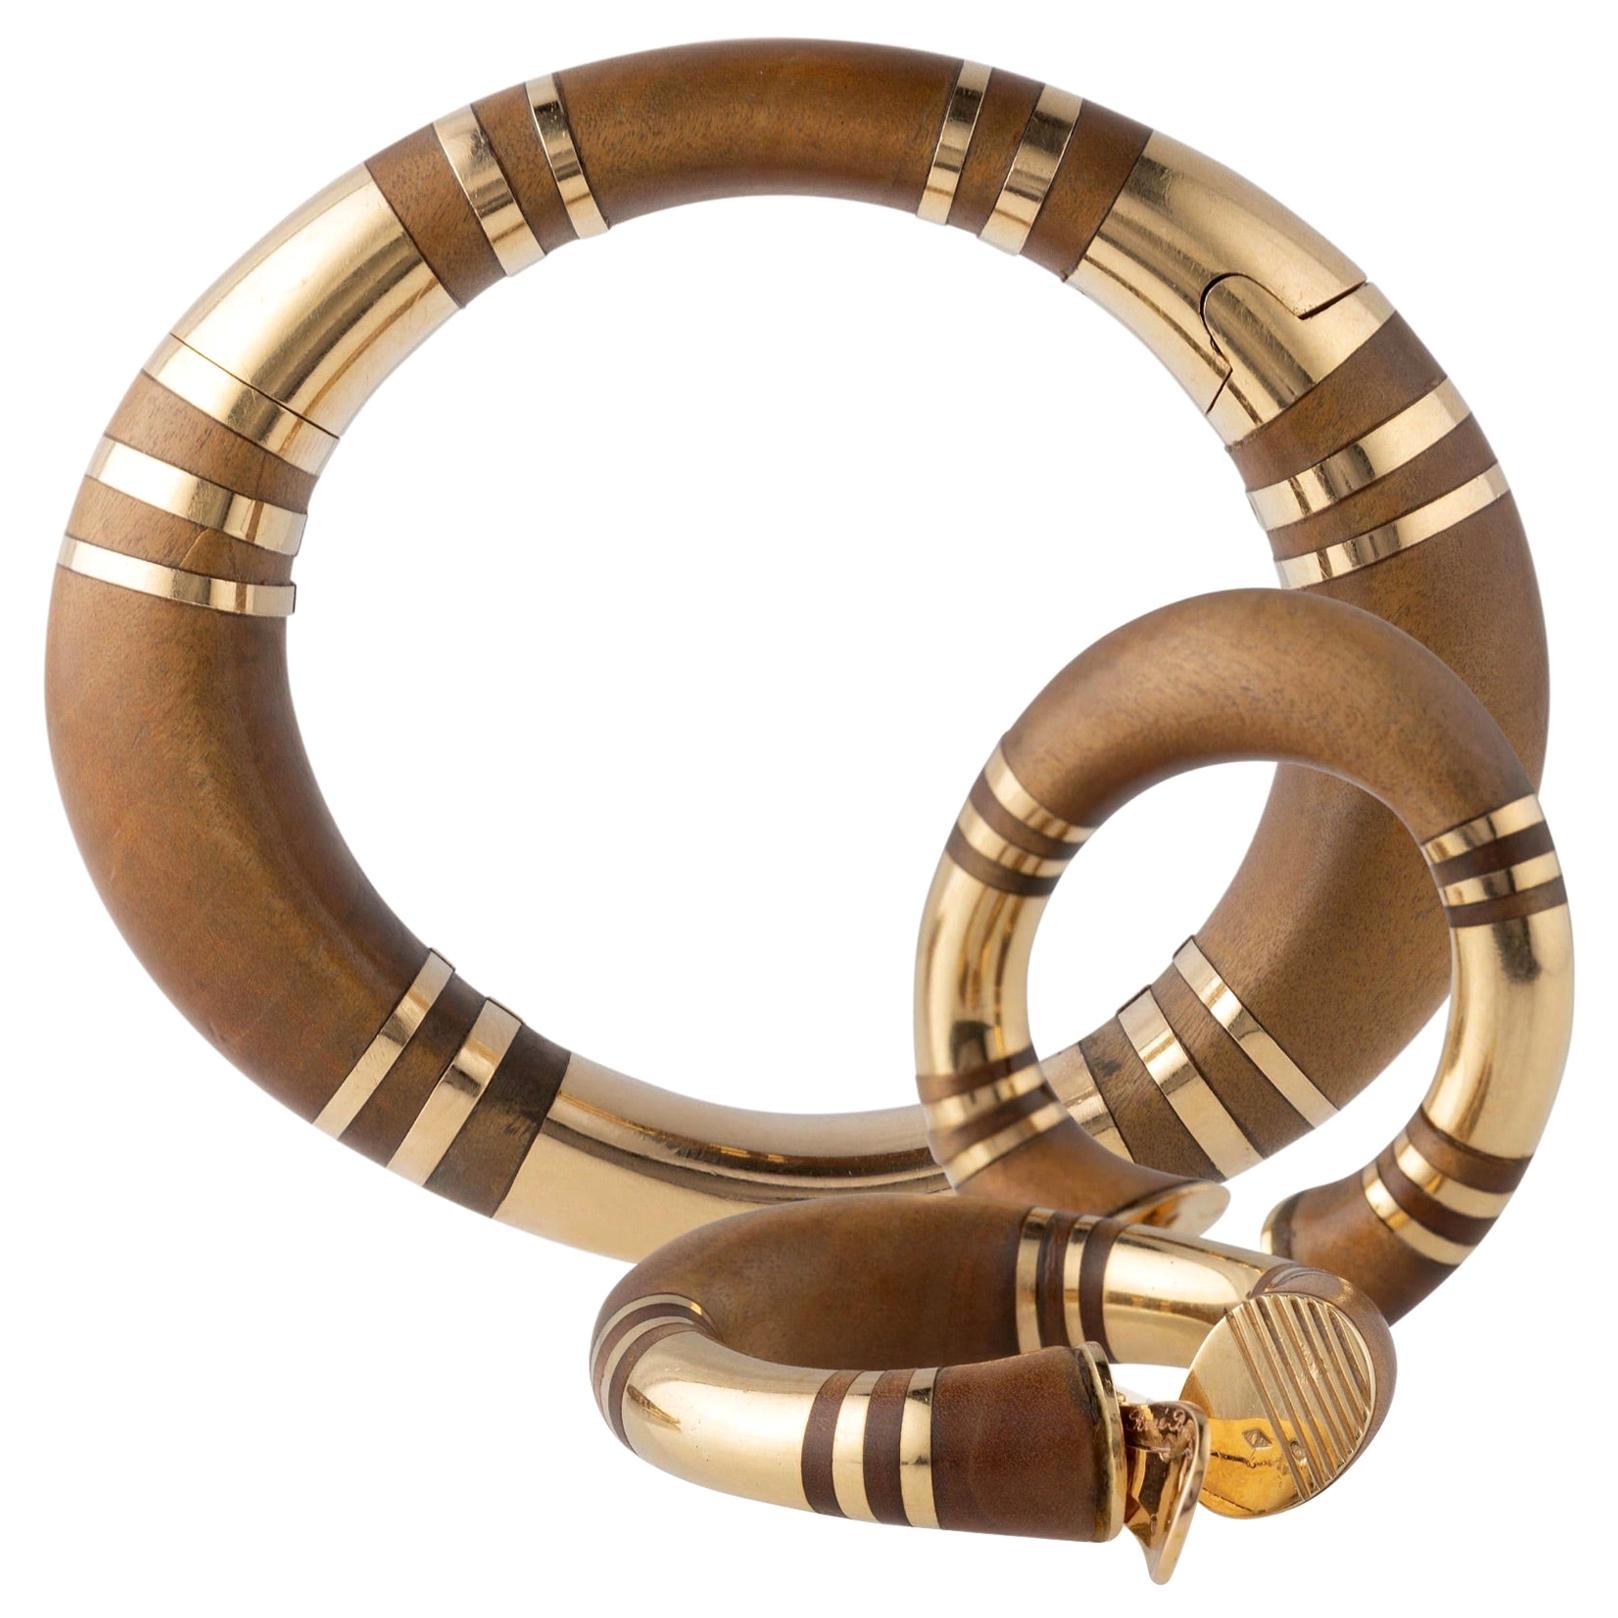 René Boivin set  (openable bracelet and a pair of ear clips) in wood with rings in yellow gold. 
Signed René Boivin. 
Circa 1970
Bracelet length: 18 cm. Width: 5 cm. 
Total weight: 137.5 g.
